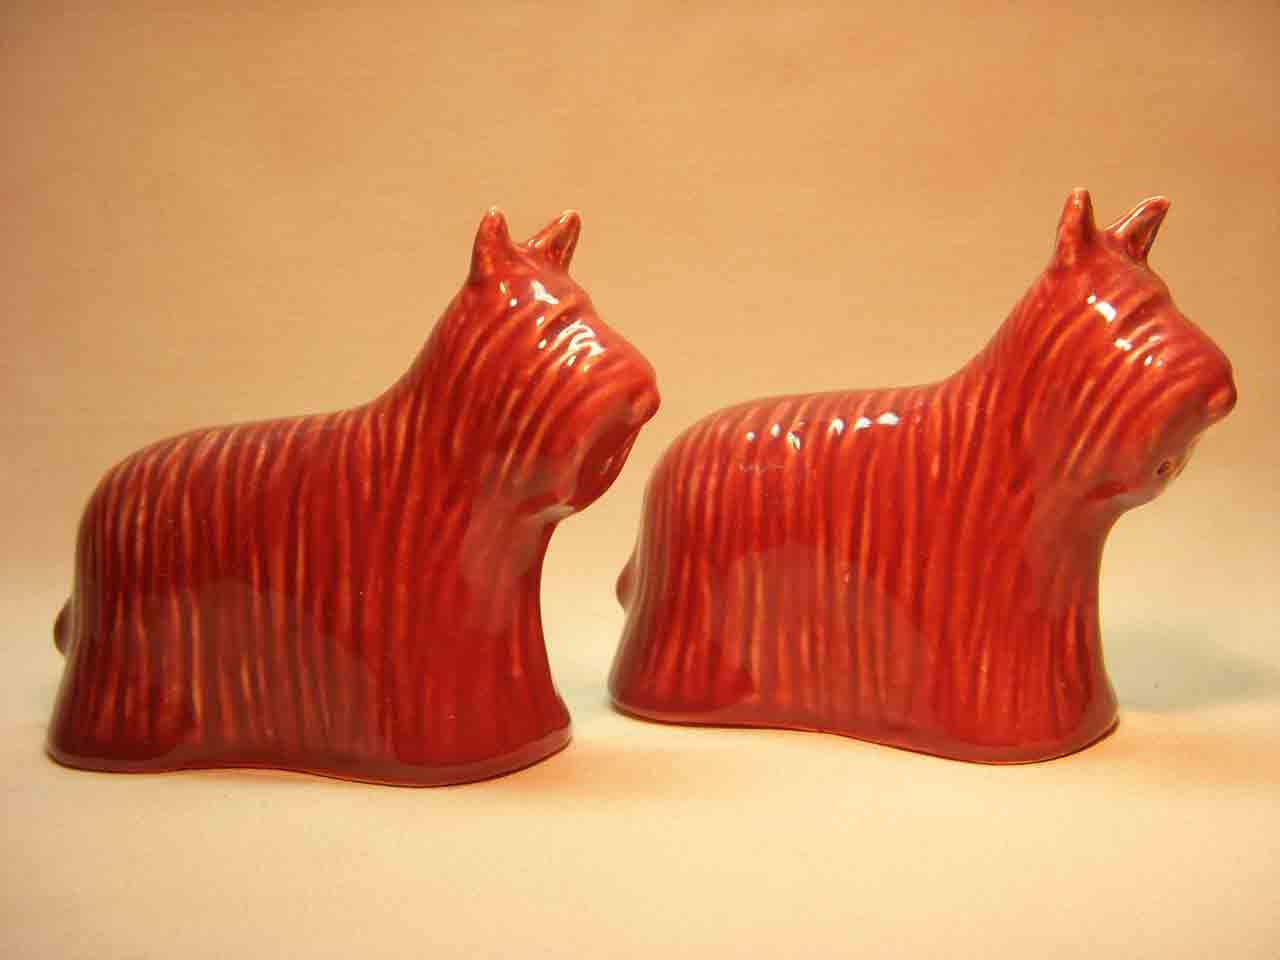 Pacific Pottery salt and pepper shakers - dogs